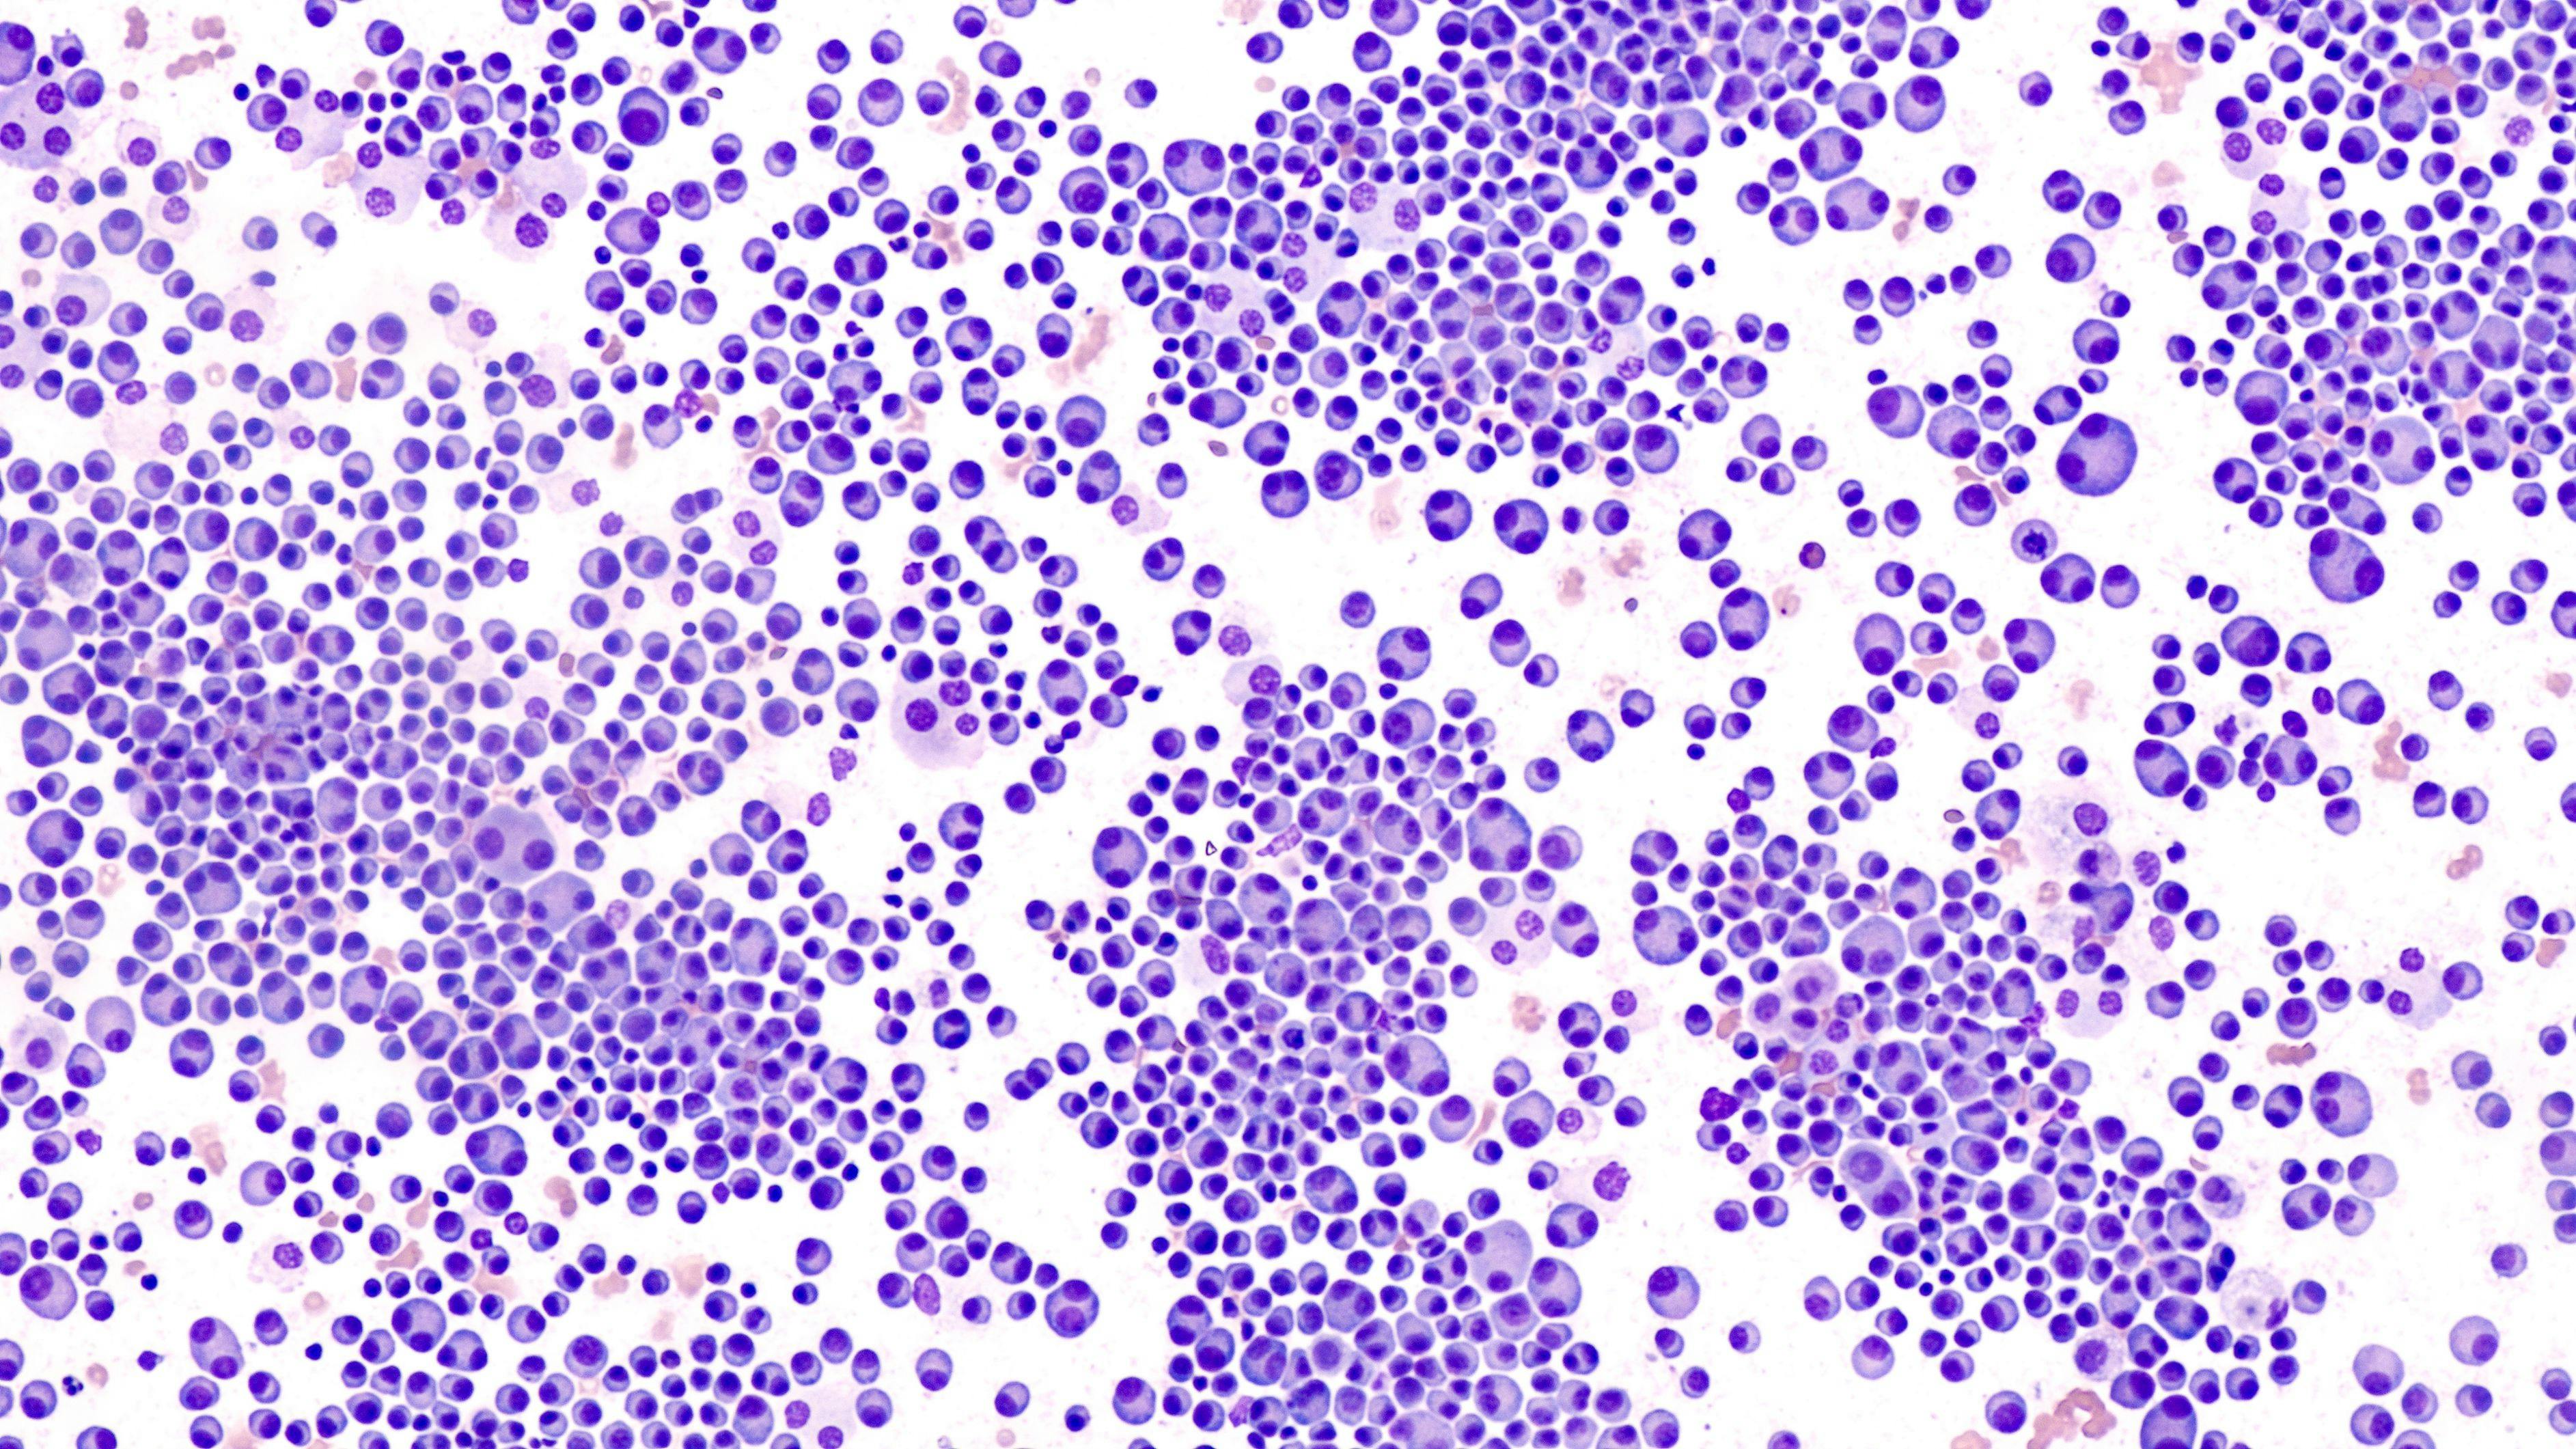 Multiple Myeloma Awareness: Bone marrow aspirate cytology of multiple myeloma, a type of bone marrow cancer of malignant plasma cells, associated with bone pain, bone fractures and anemia. |  Image Credit: © David A Litman - www.stock.adobe.com